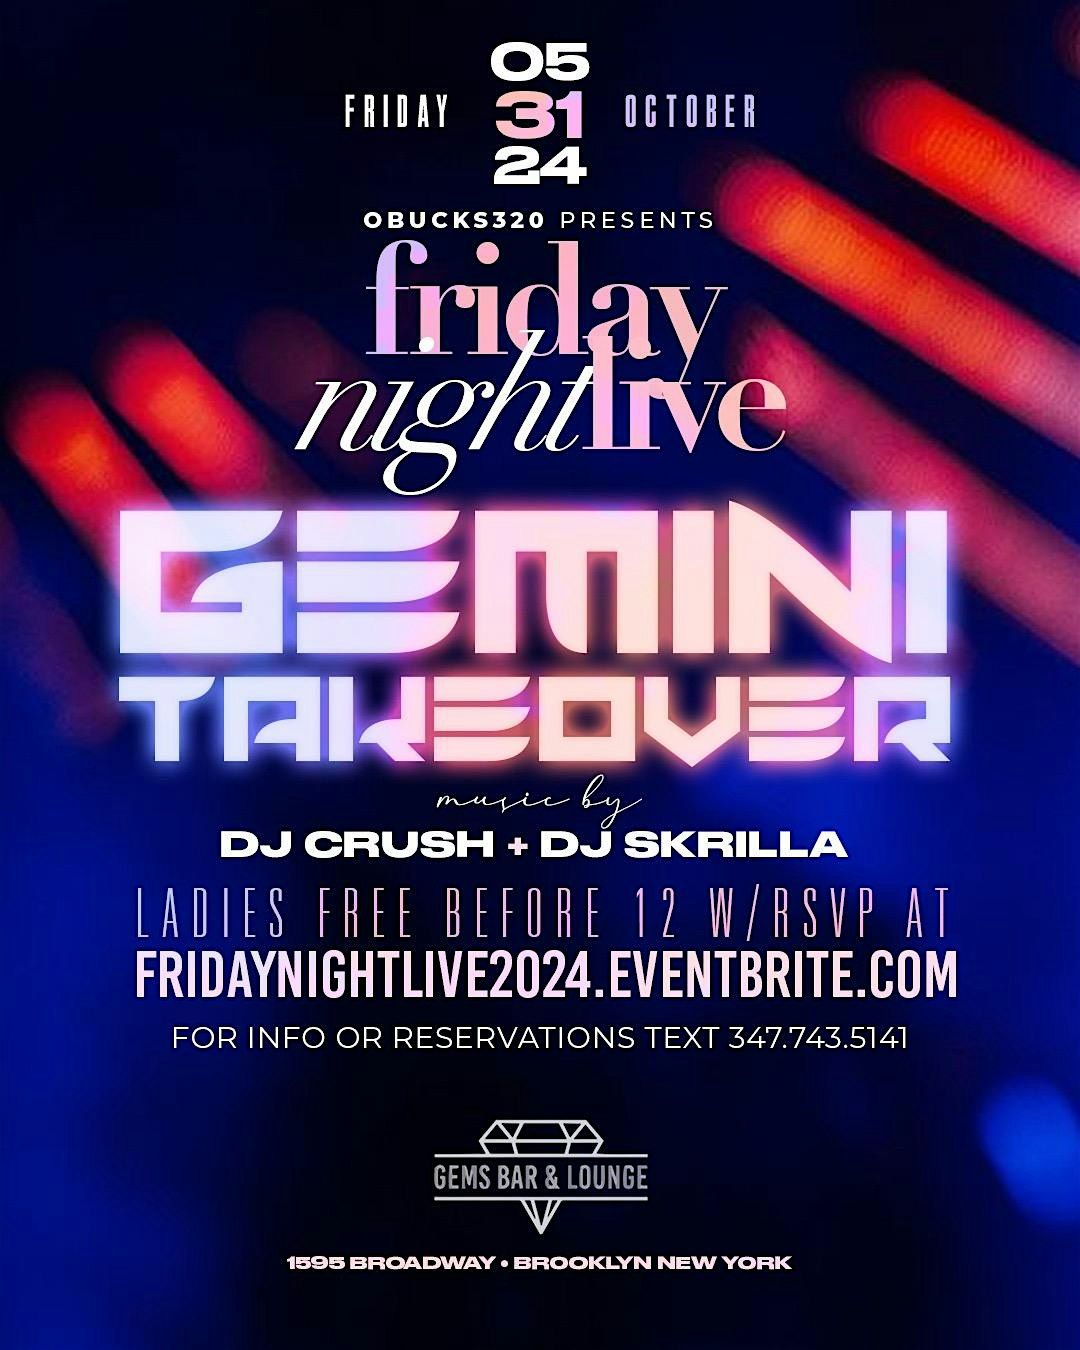 FRIDAY NIGHT LIVE "THE GEMINI TAKEOVER"